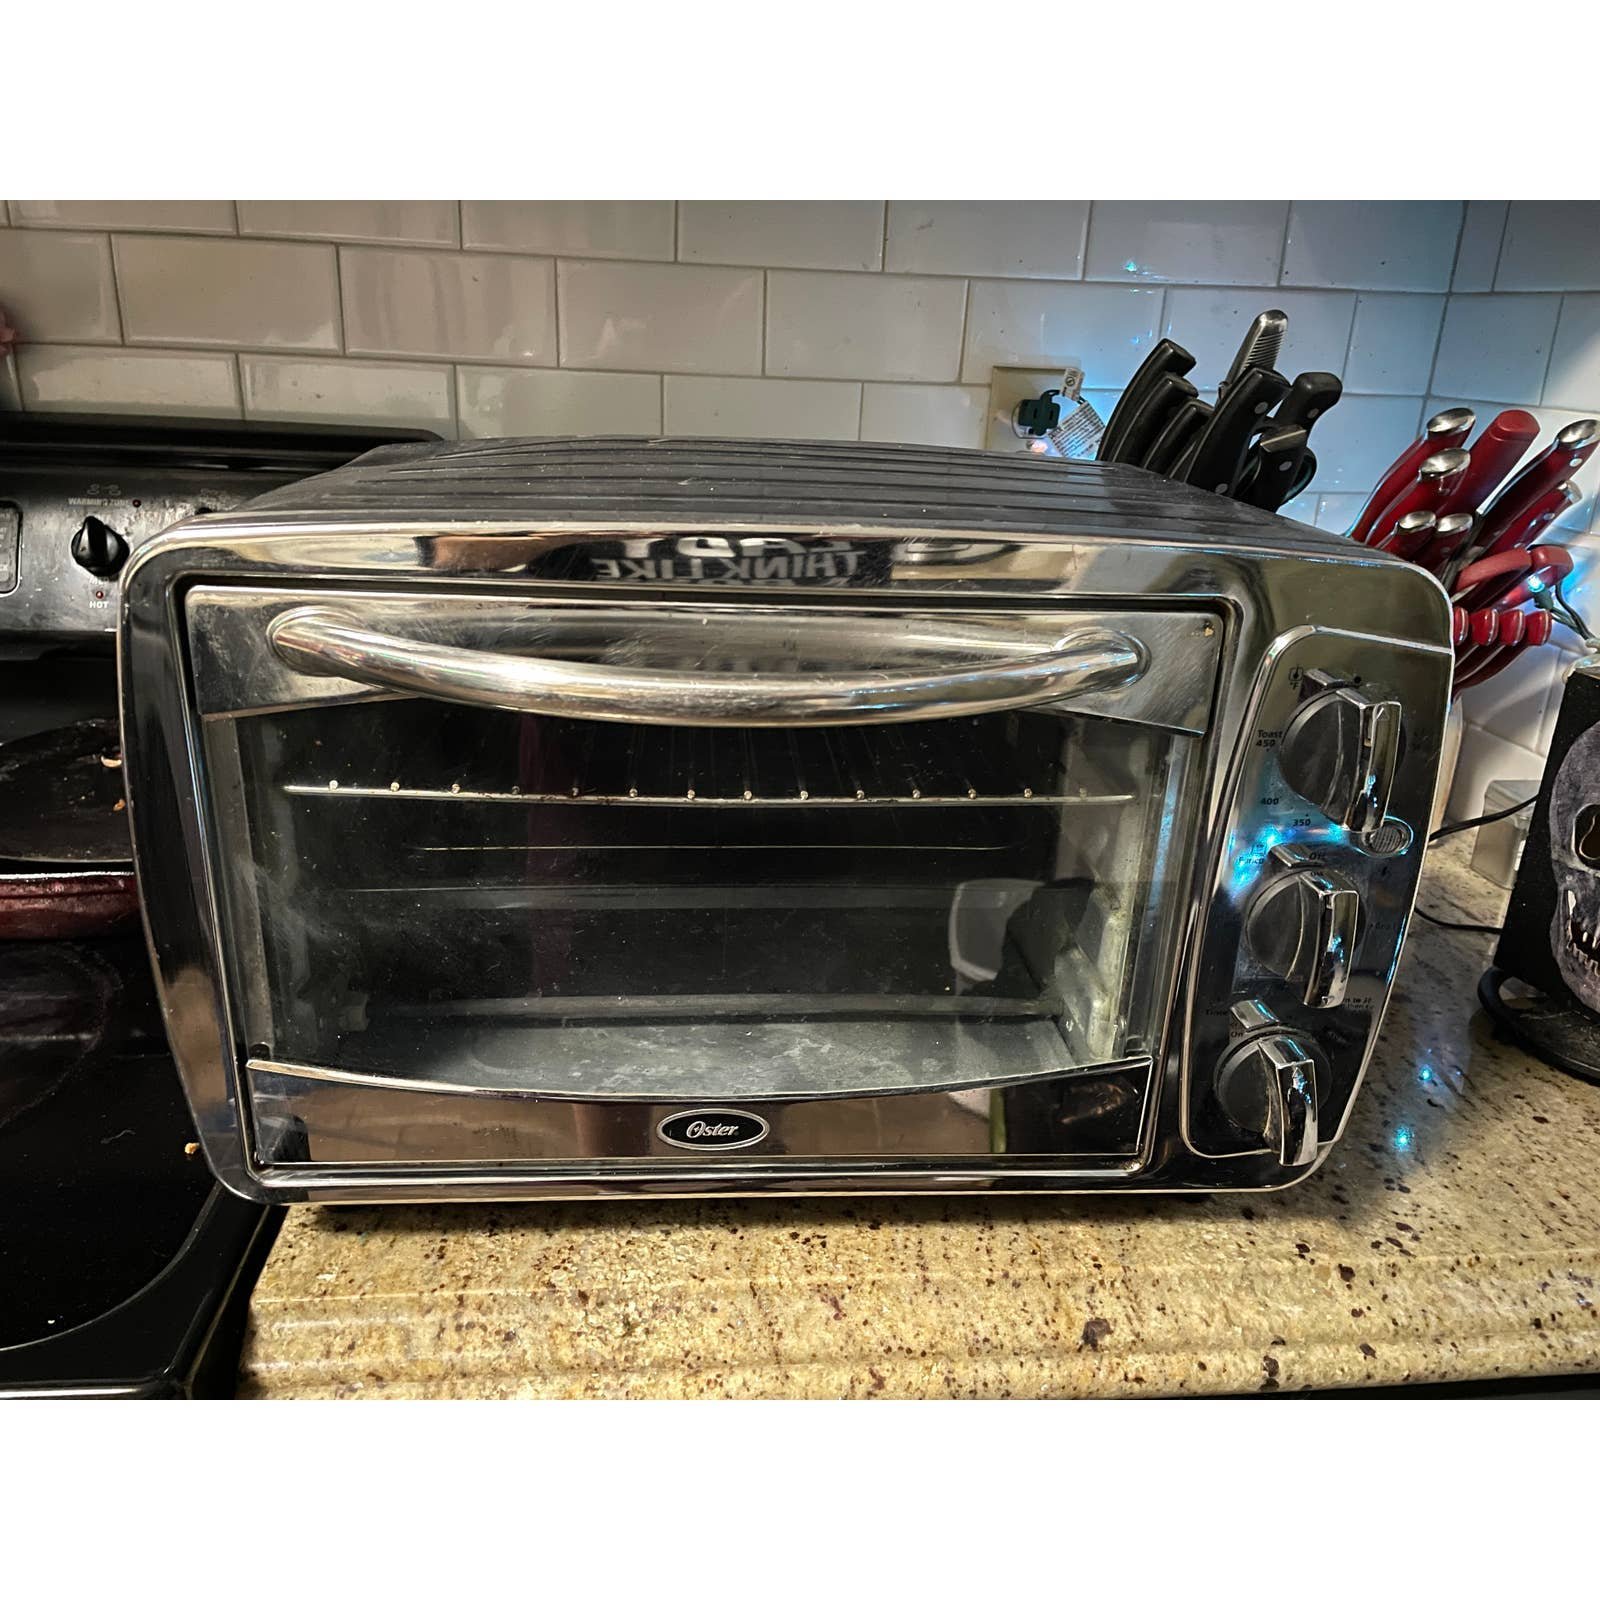 Oster Versatile Countertop Toaster Oven 1400W Chrome TSSTTV0000 Tested & Working drOtfNpO1